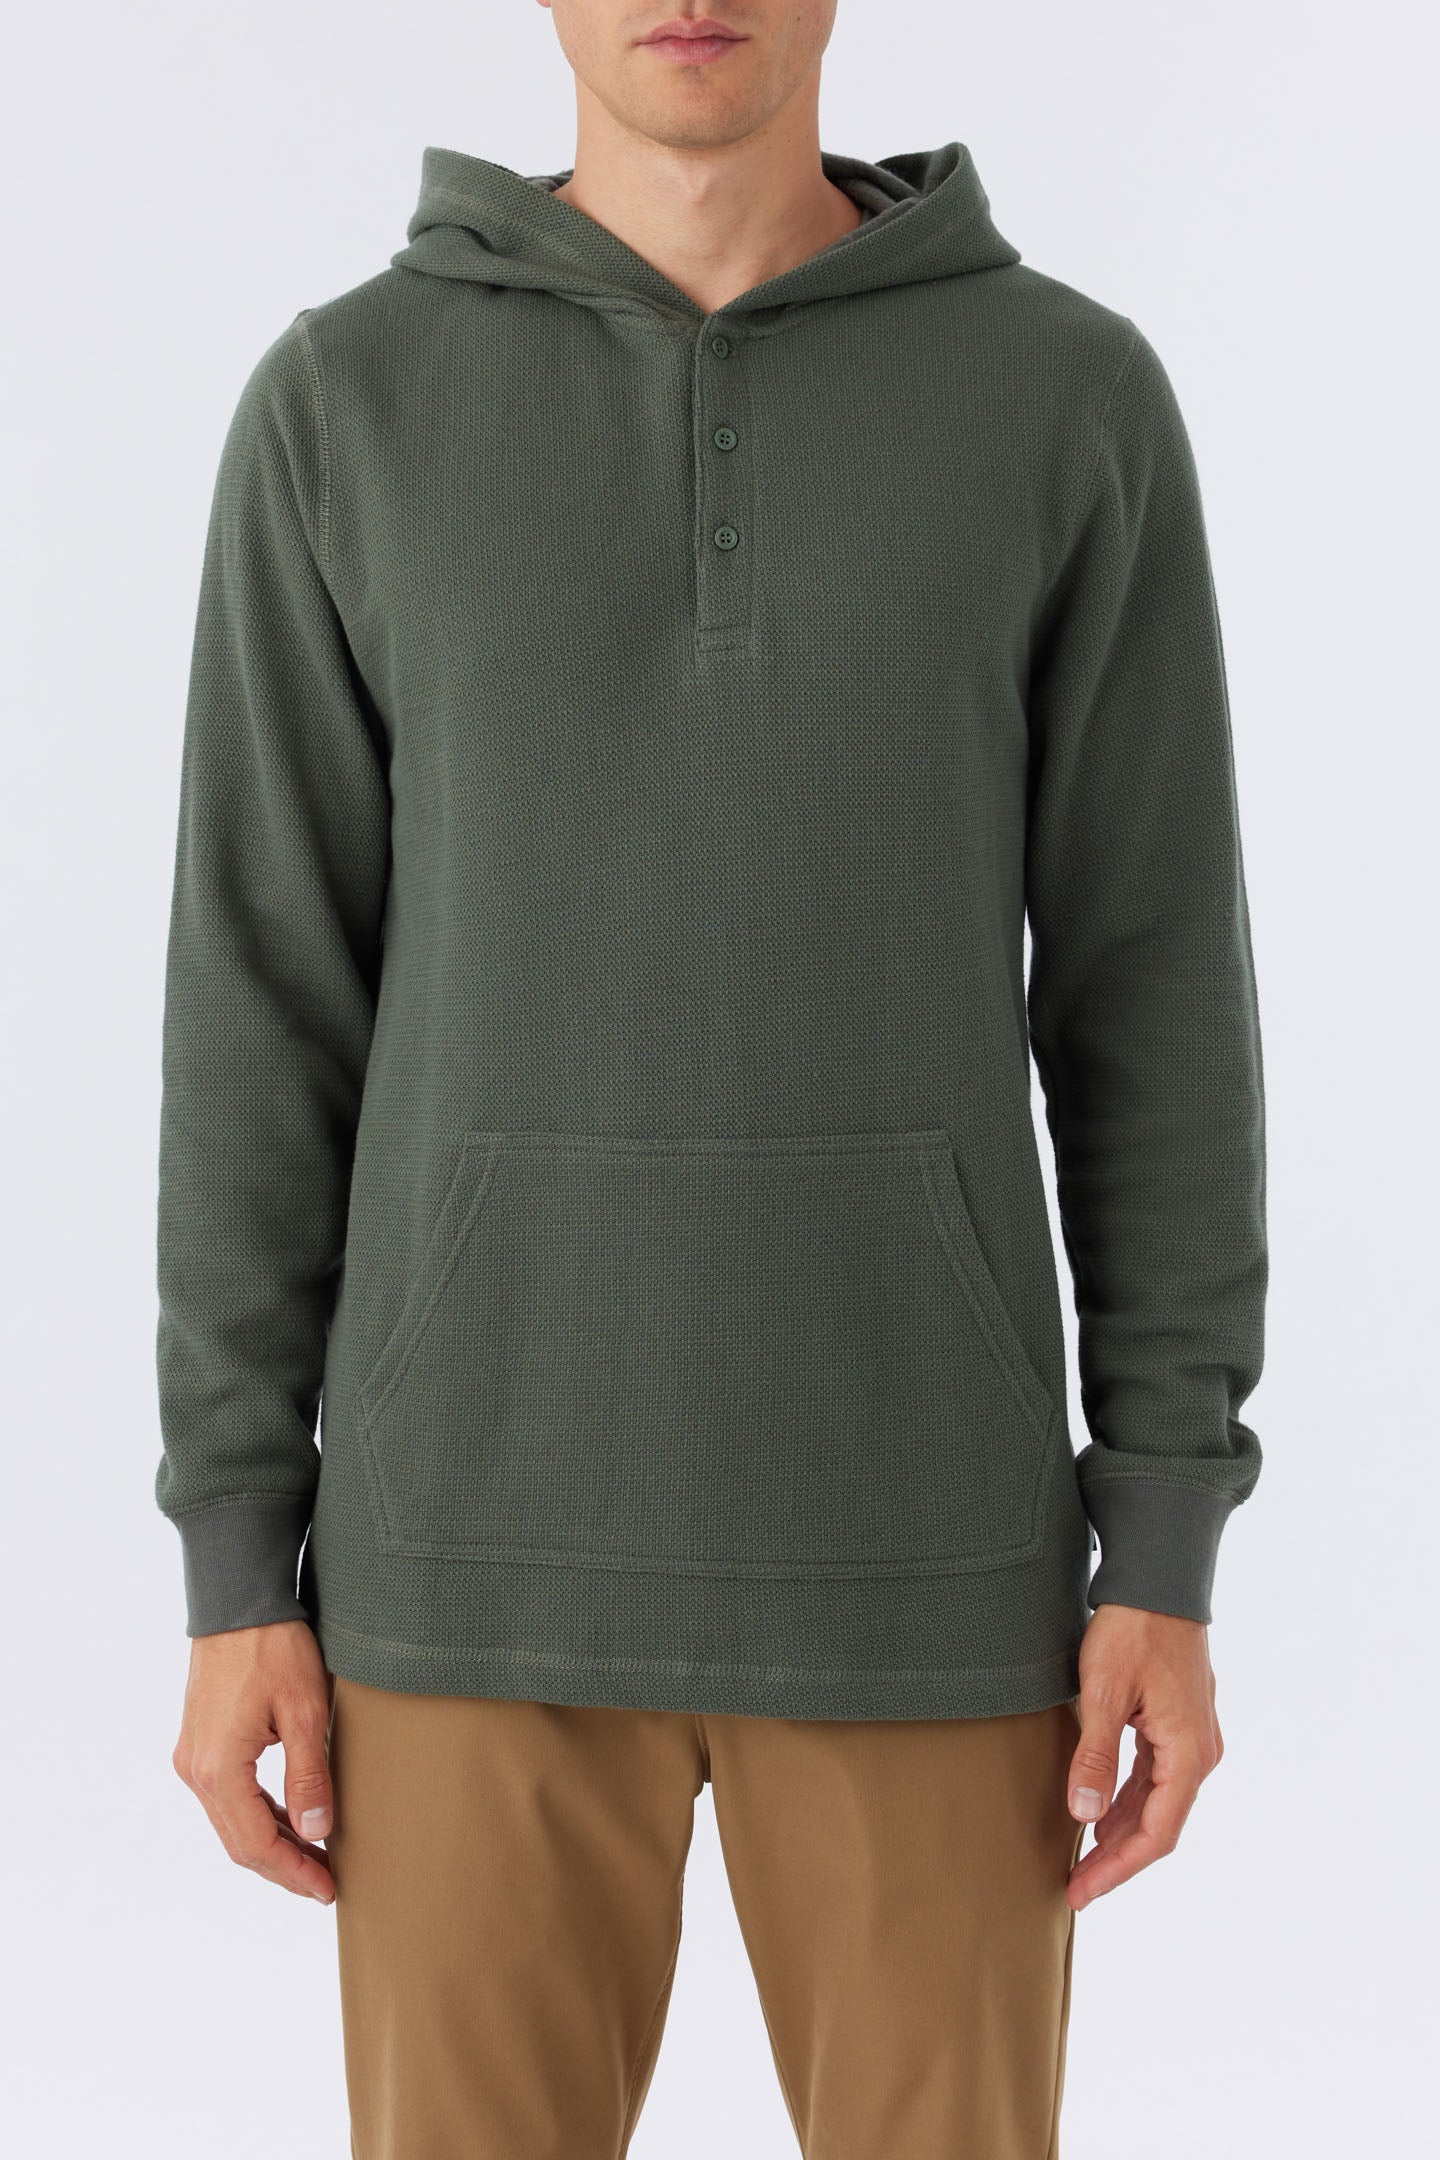 Timberlane Pullover-Olive | O'Neill